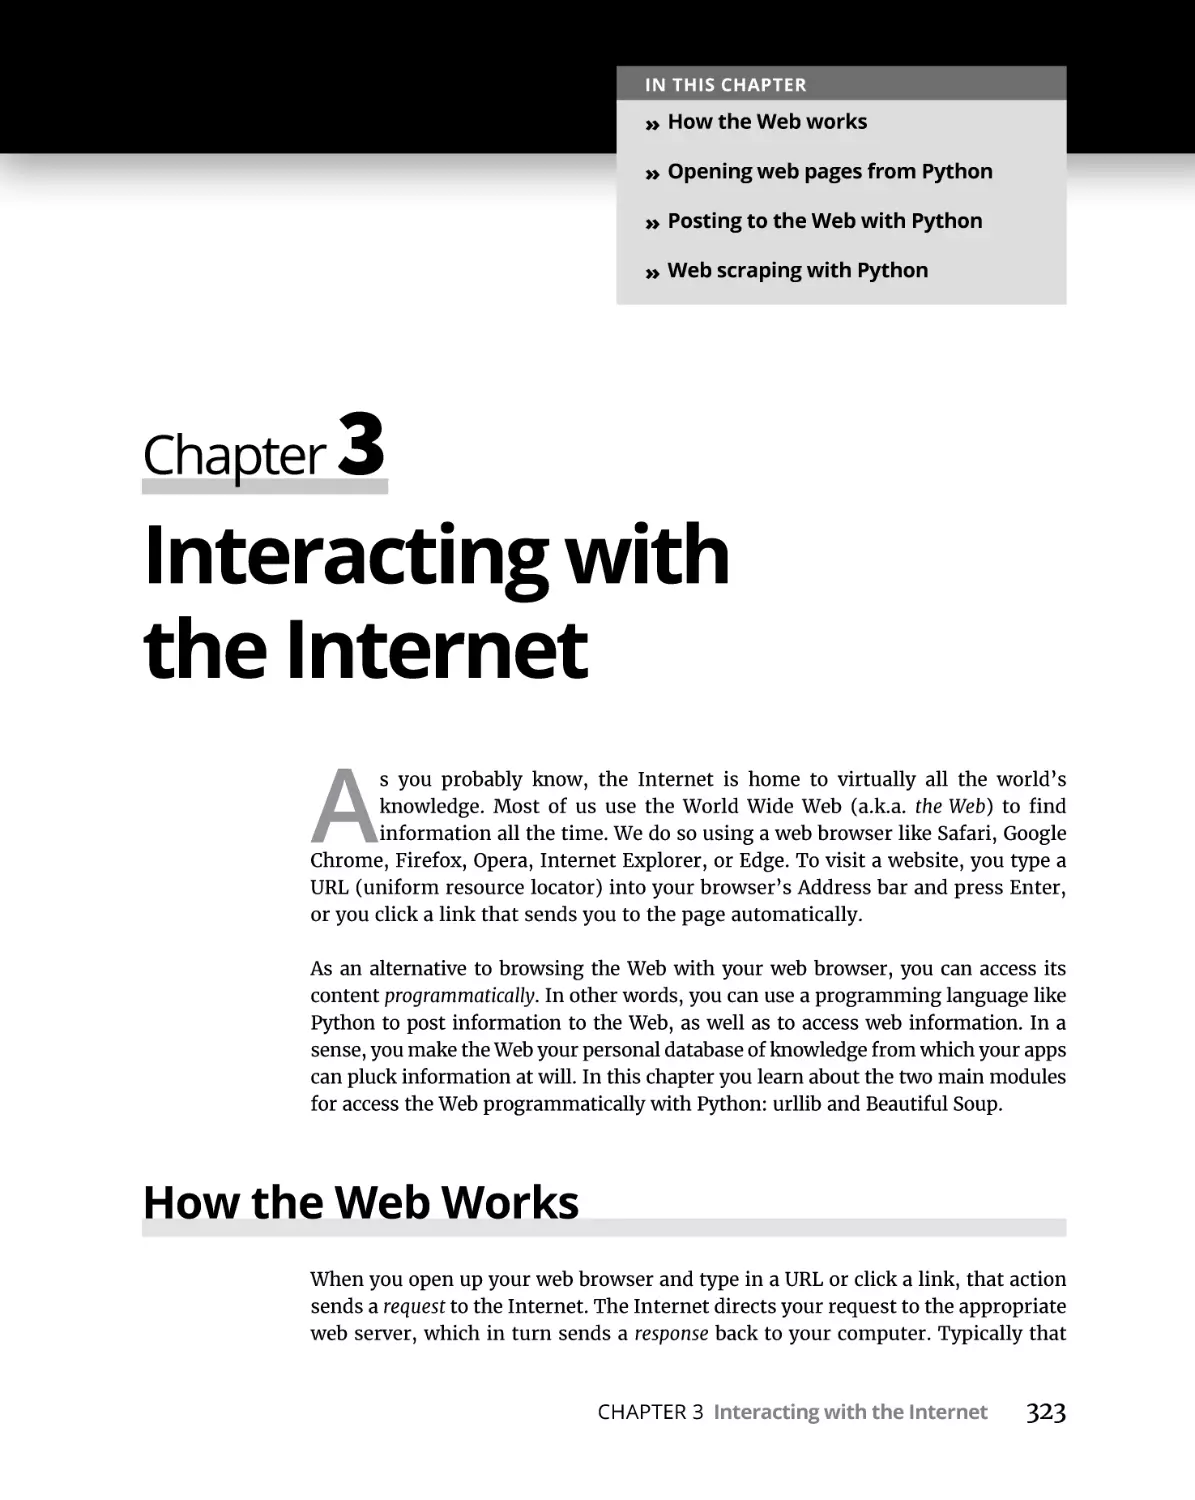 Chapter 3 Interacting with the Internet
How the Web Works